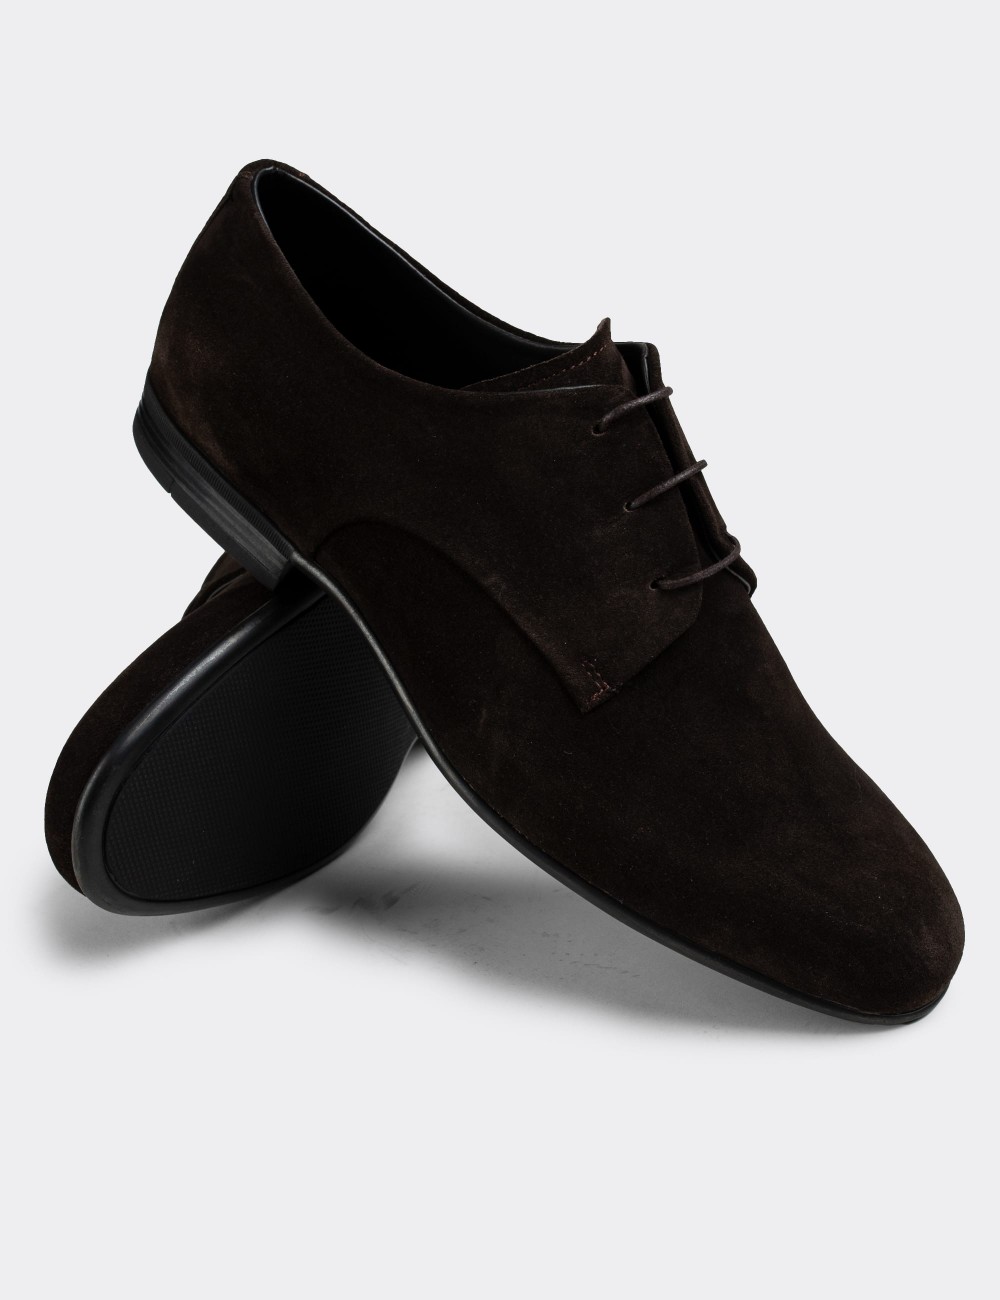 Brown Suede Leather Classic Shoes - 01709MKHVC01